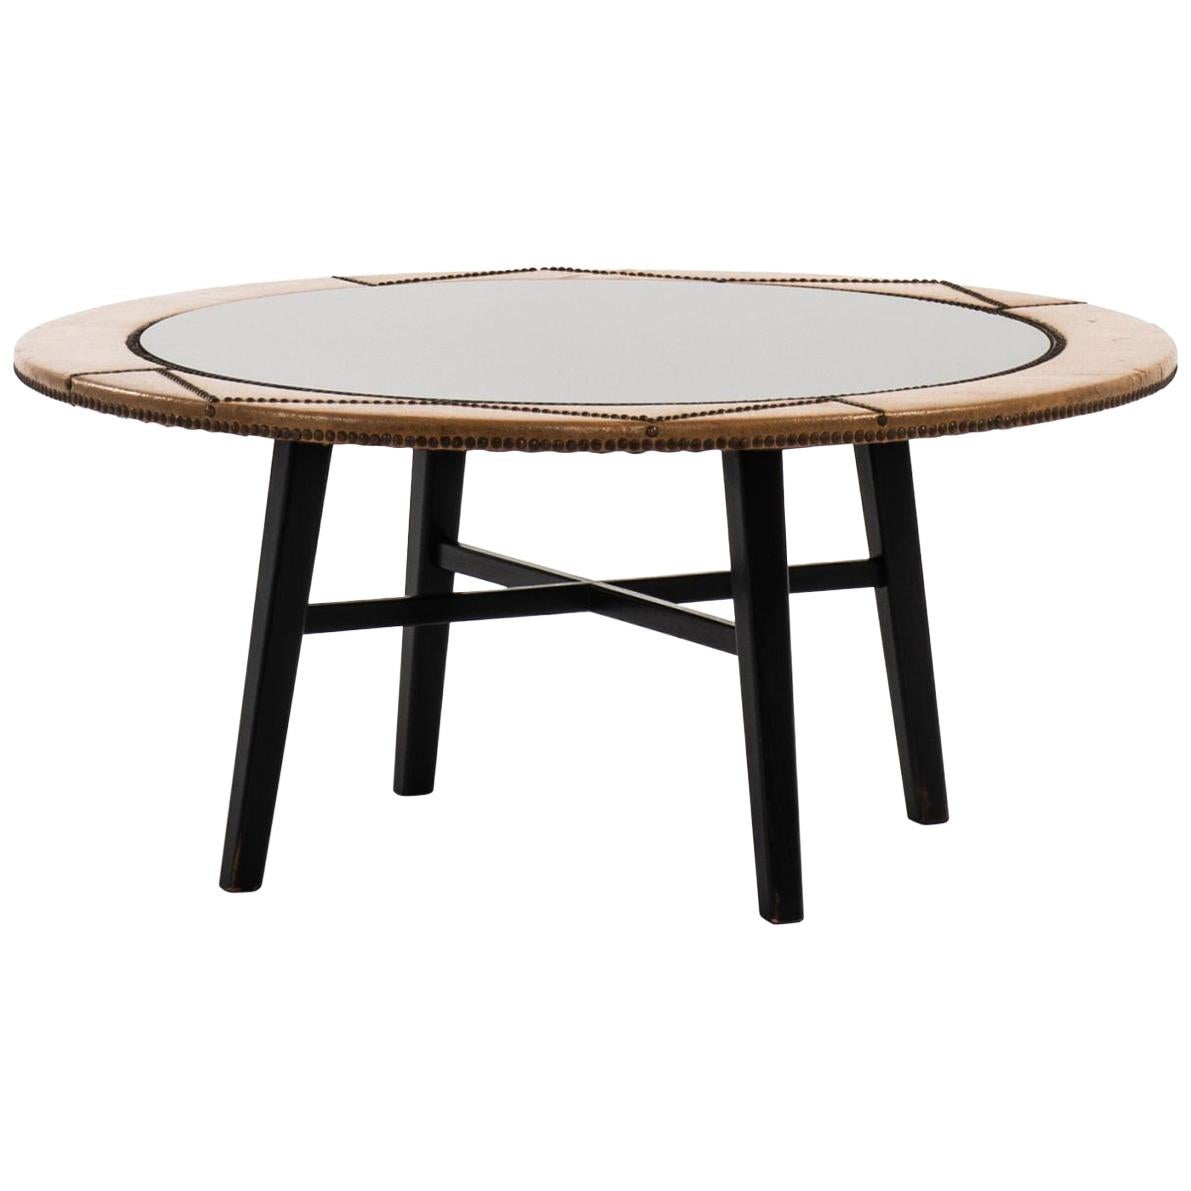 Otto Schulz Coffee Table Produced by Boet in Sweden